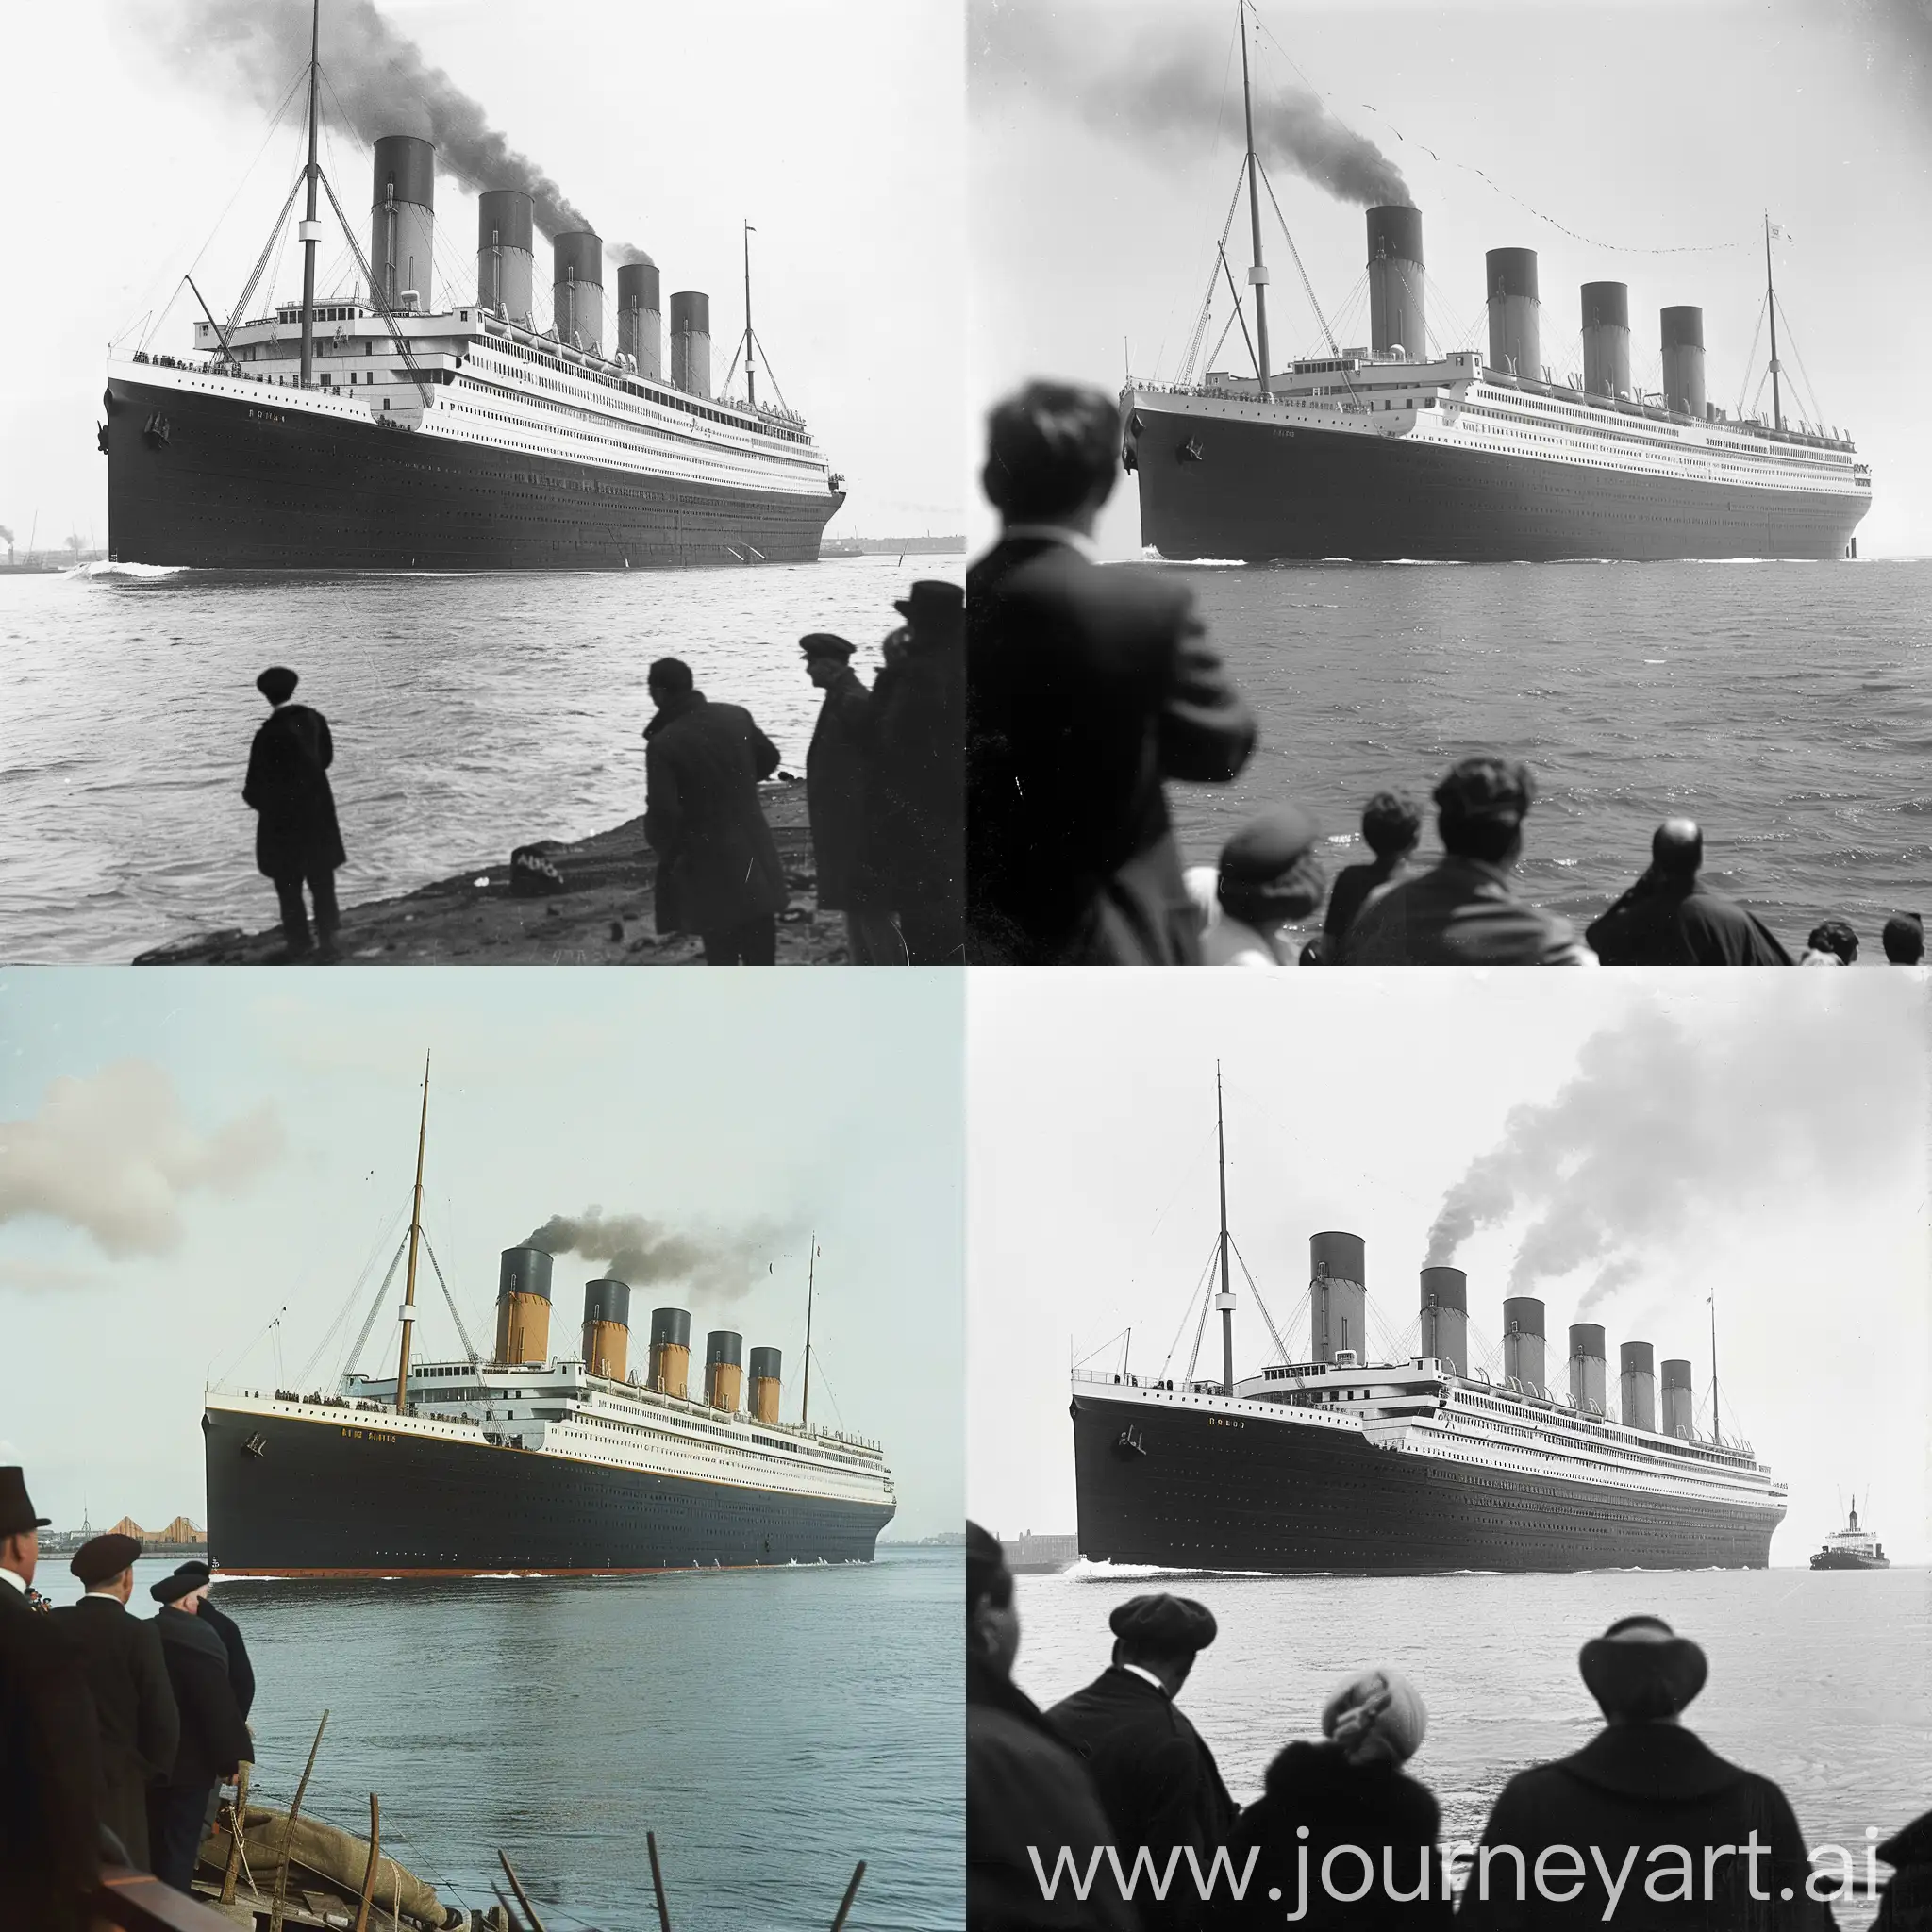 The British liner RMS Titanic, leaving southampton on its maiden voyage, a few people watching, clean day time sky, photograph, side view, profile pic of the ship, the ship only has four funnels.